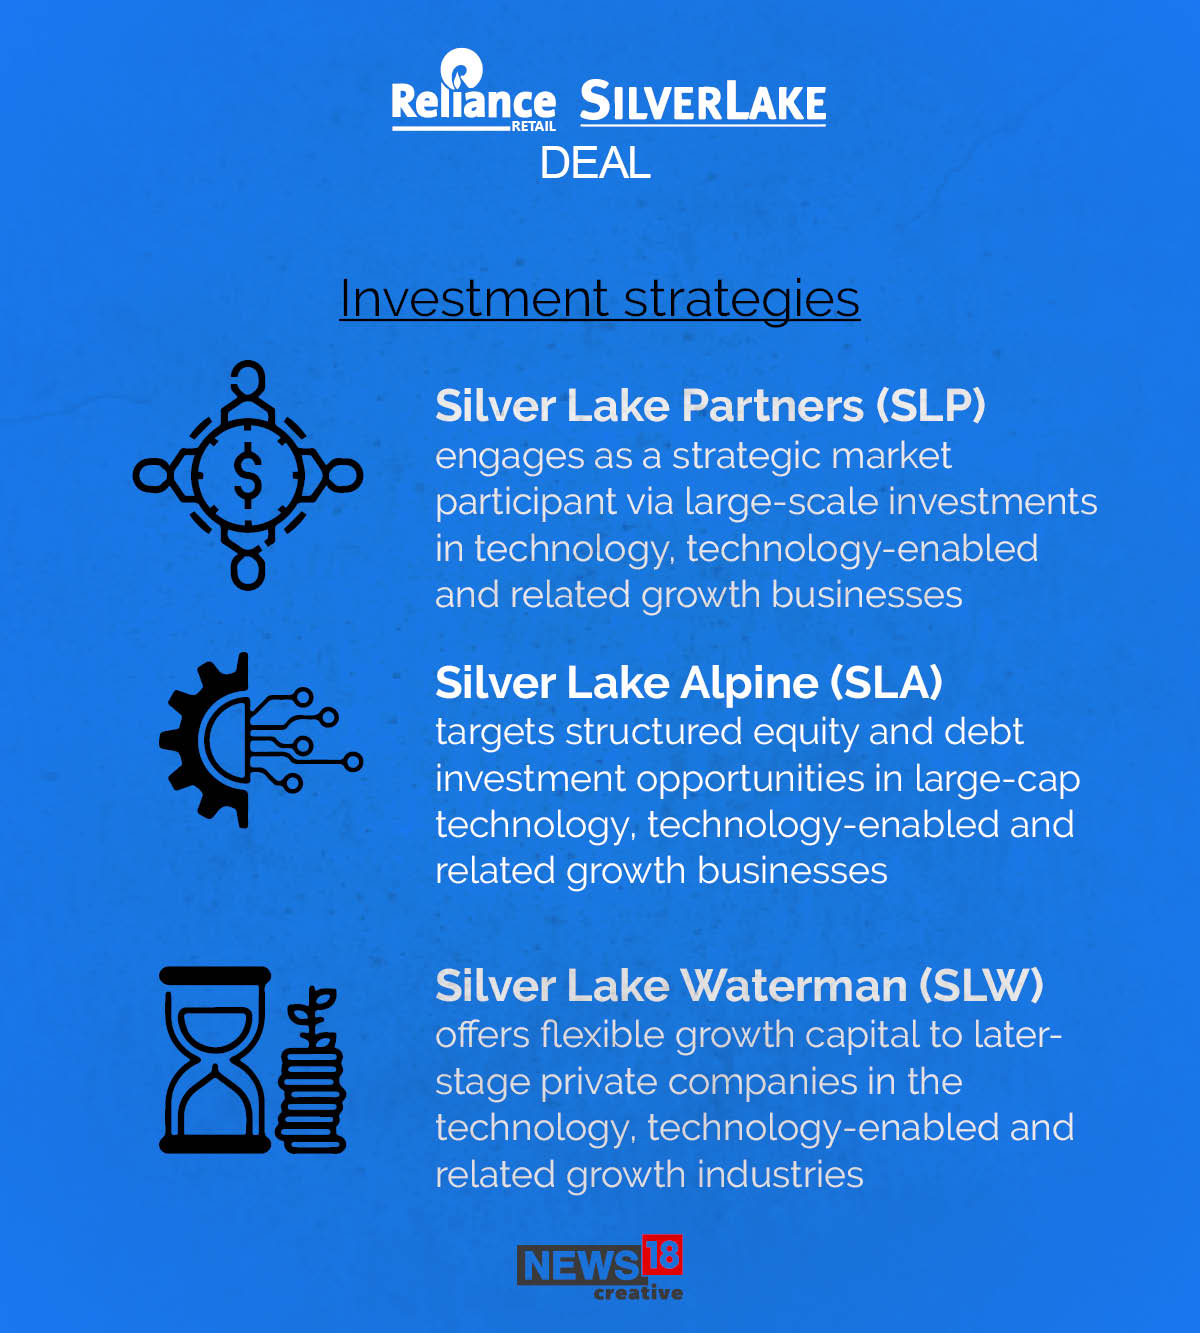 Know about Silver Lake, which will invest Rs7,500 cr in Reliance Retail